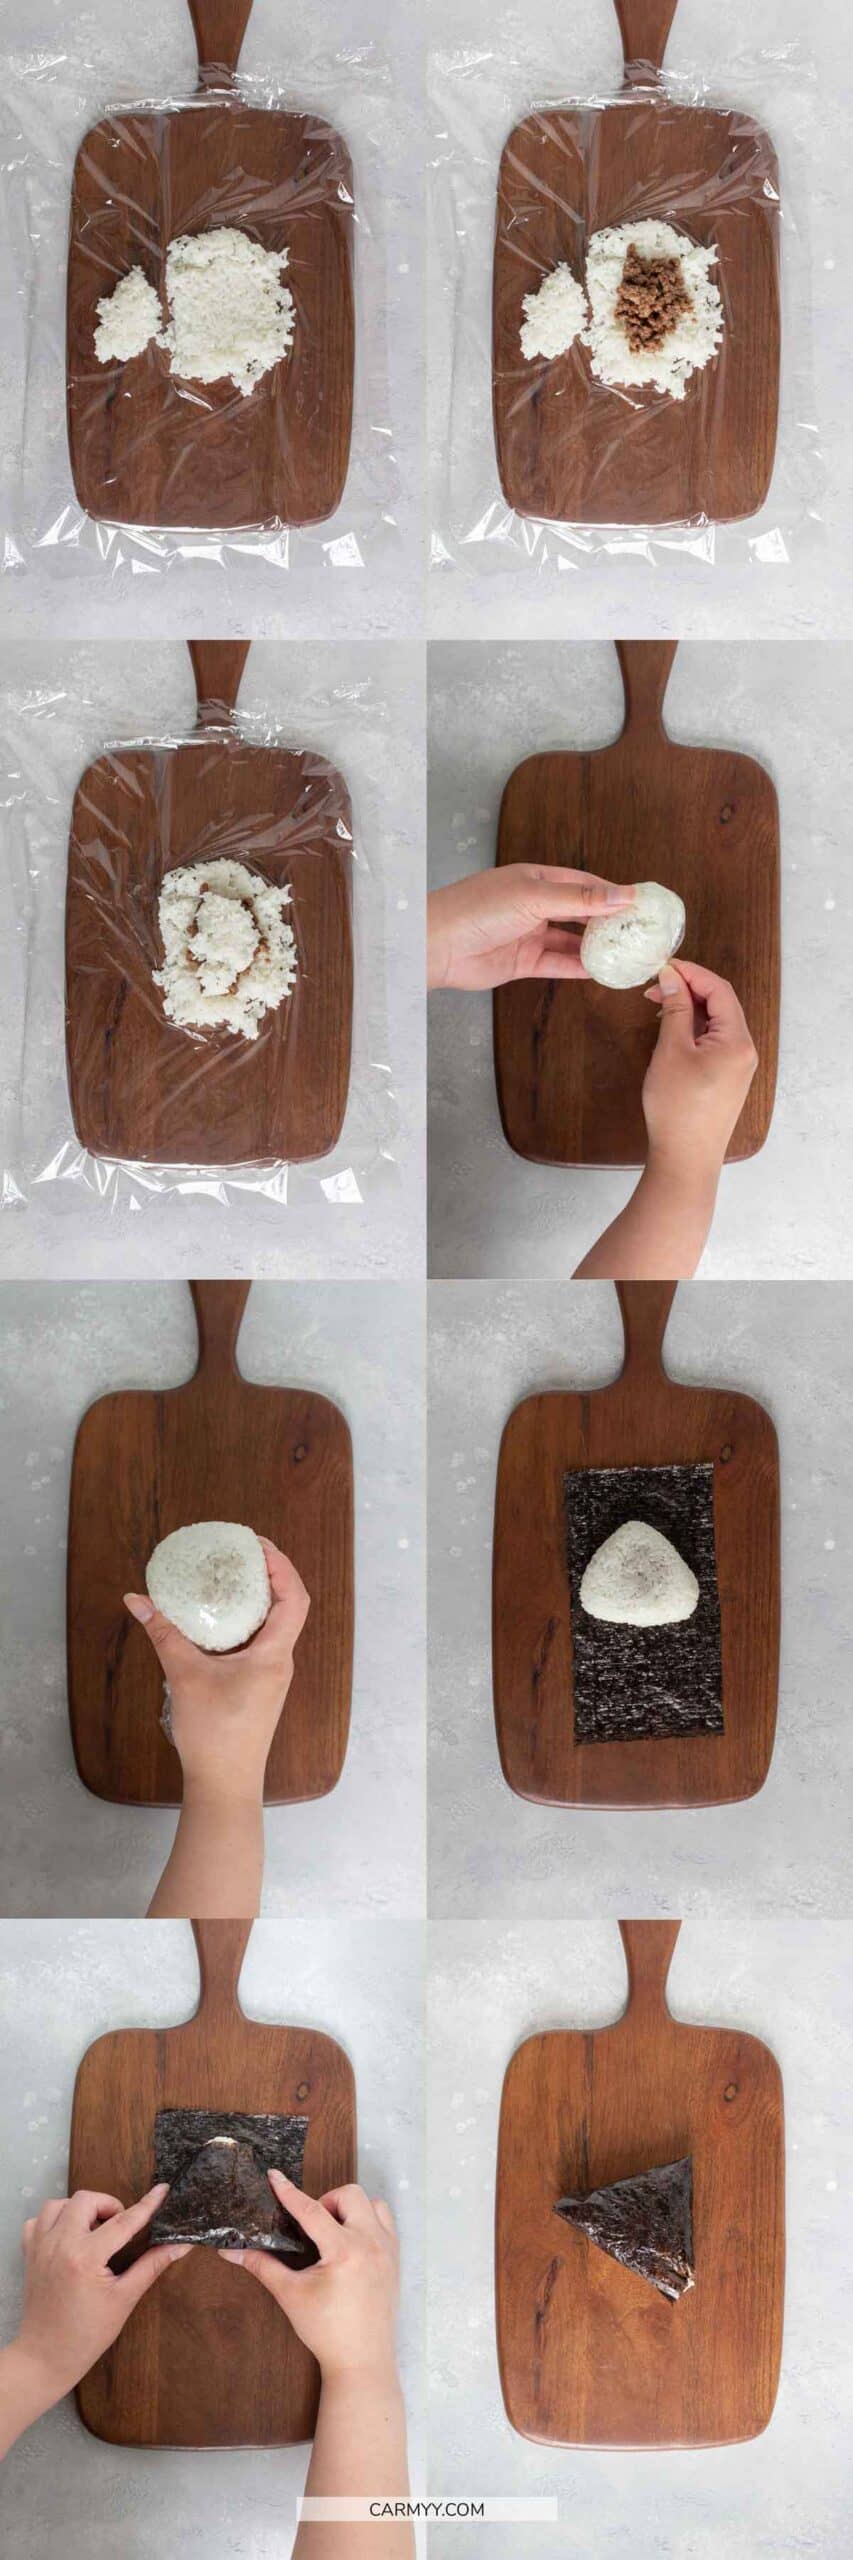 A collage of step by step photos of how to shape rice into a triangle and wrapped in seaweed.